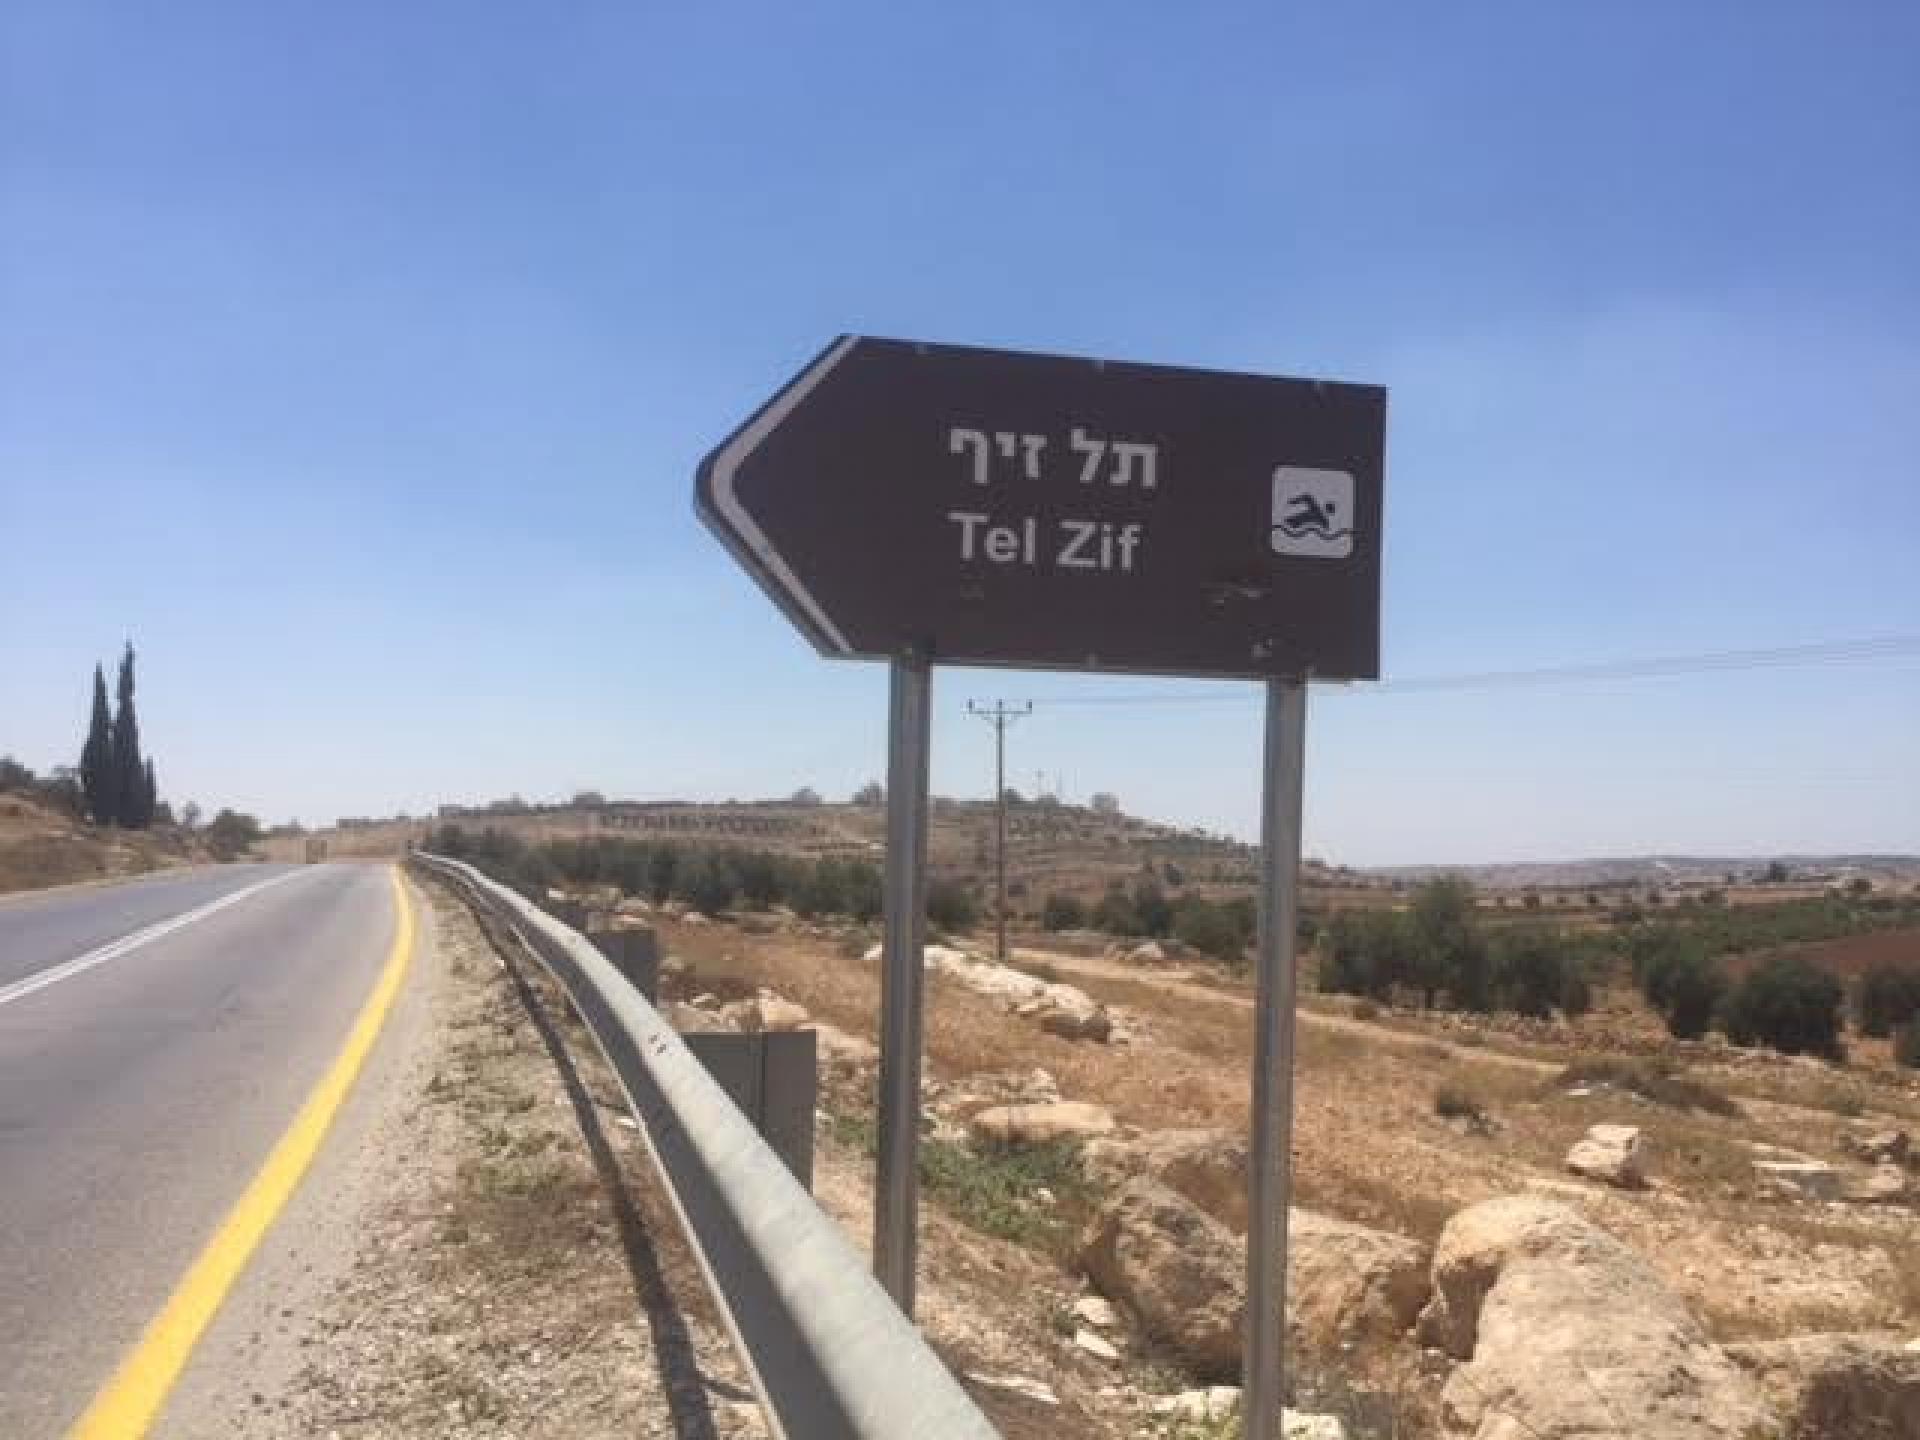 Tel Zif - the directing sign only in Hebrew